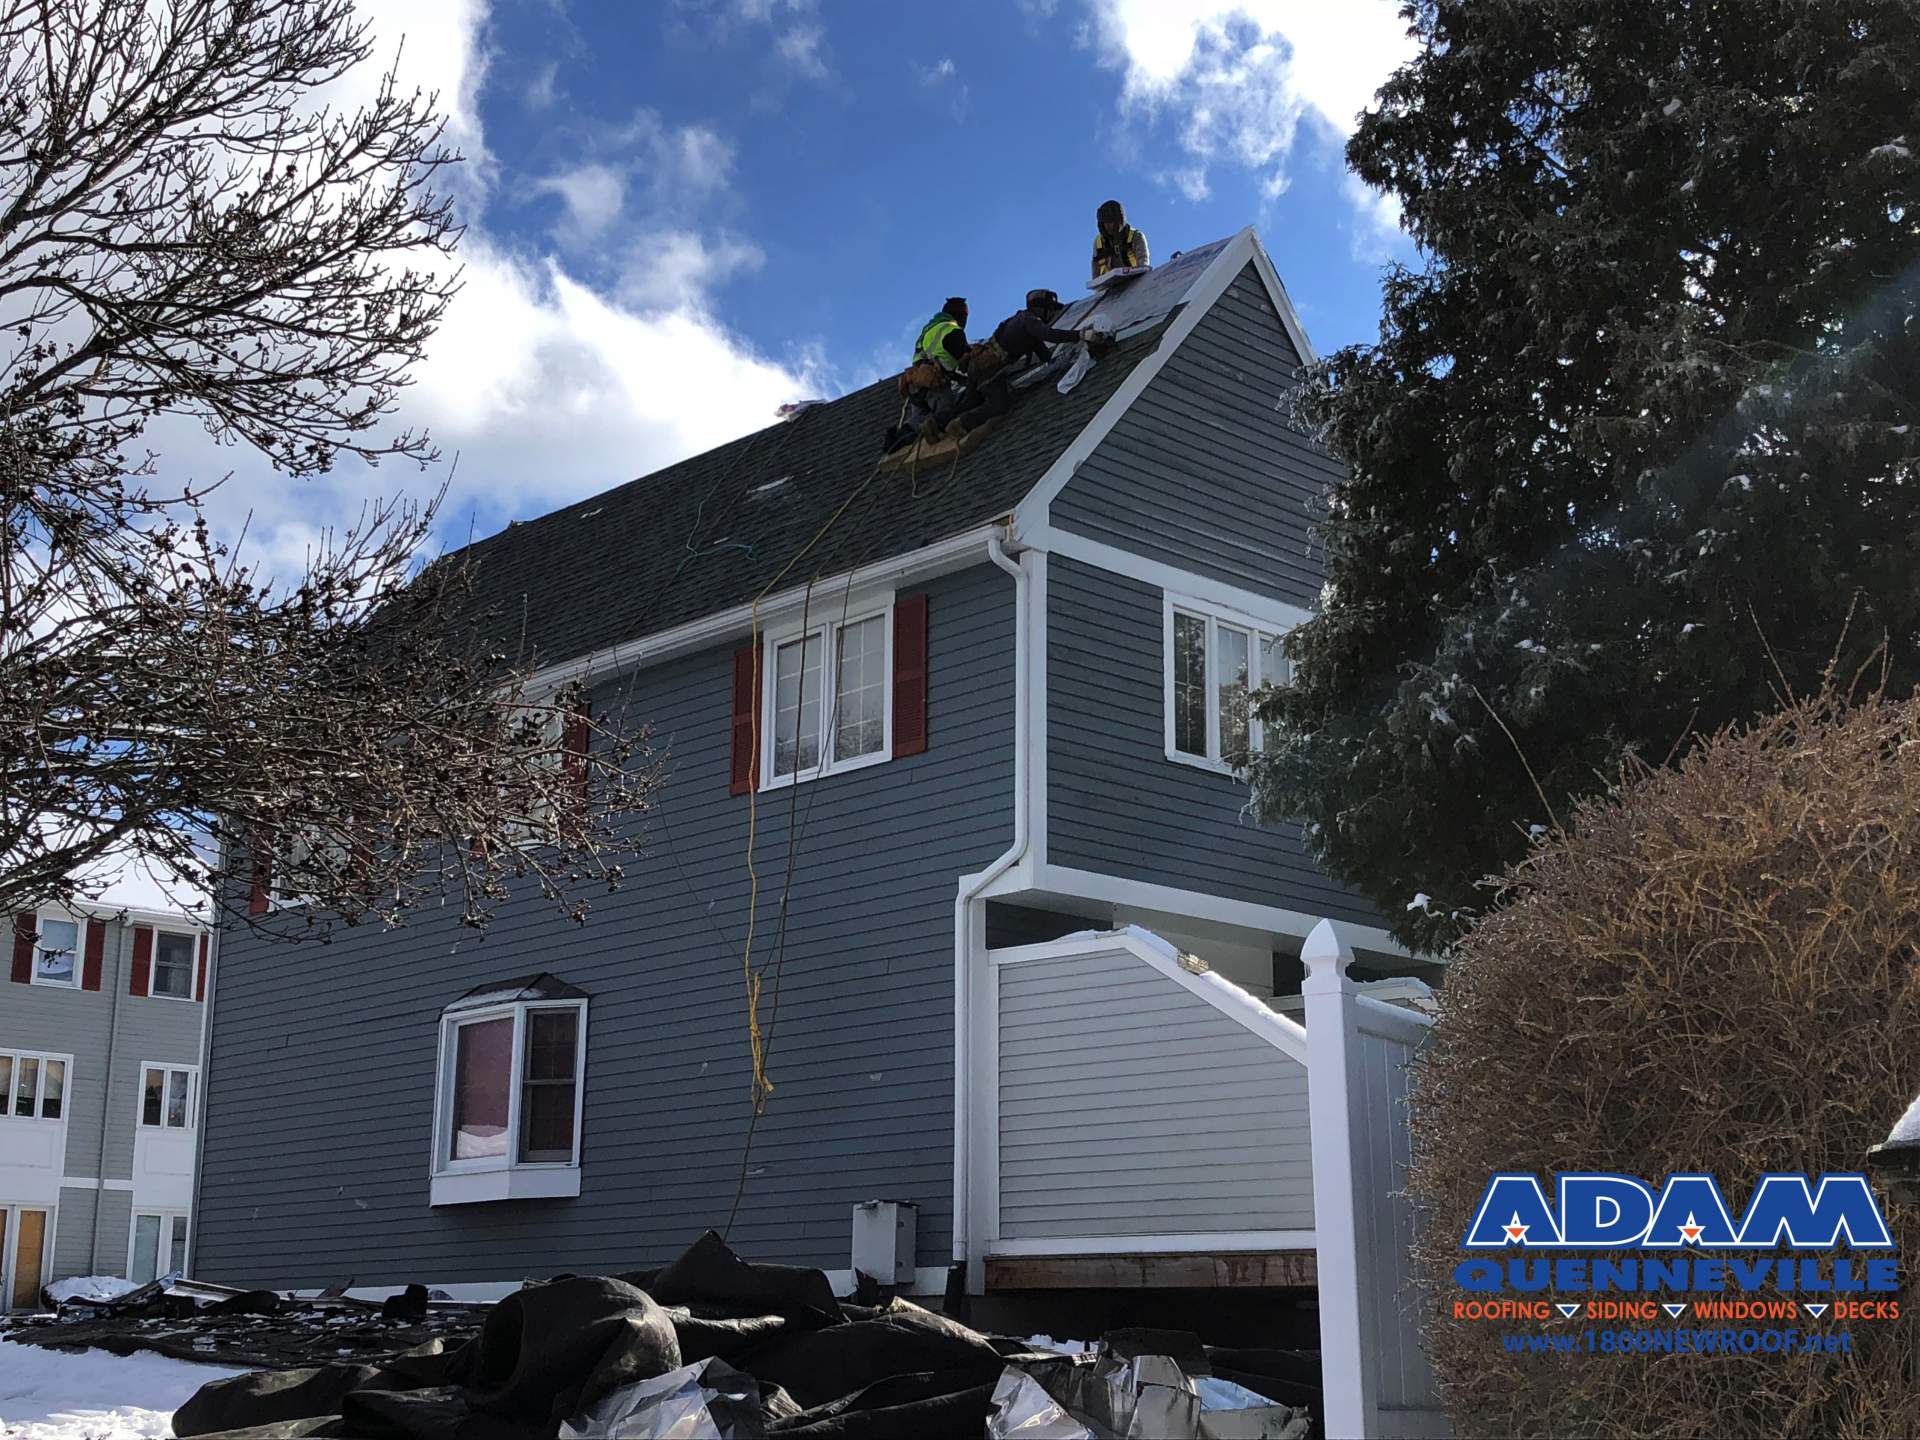 This is a photo of a local roofing and siding replacement project in progress with 3 works on the roof.